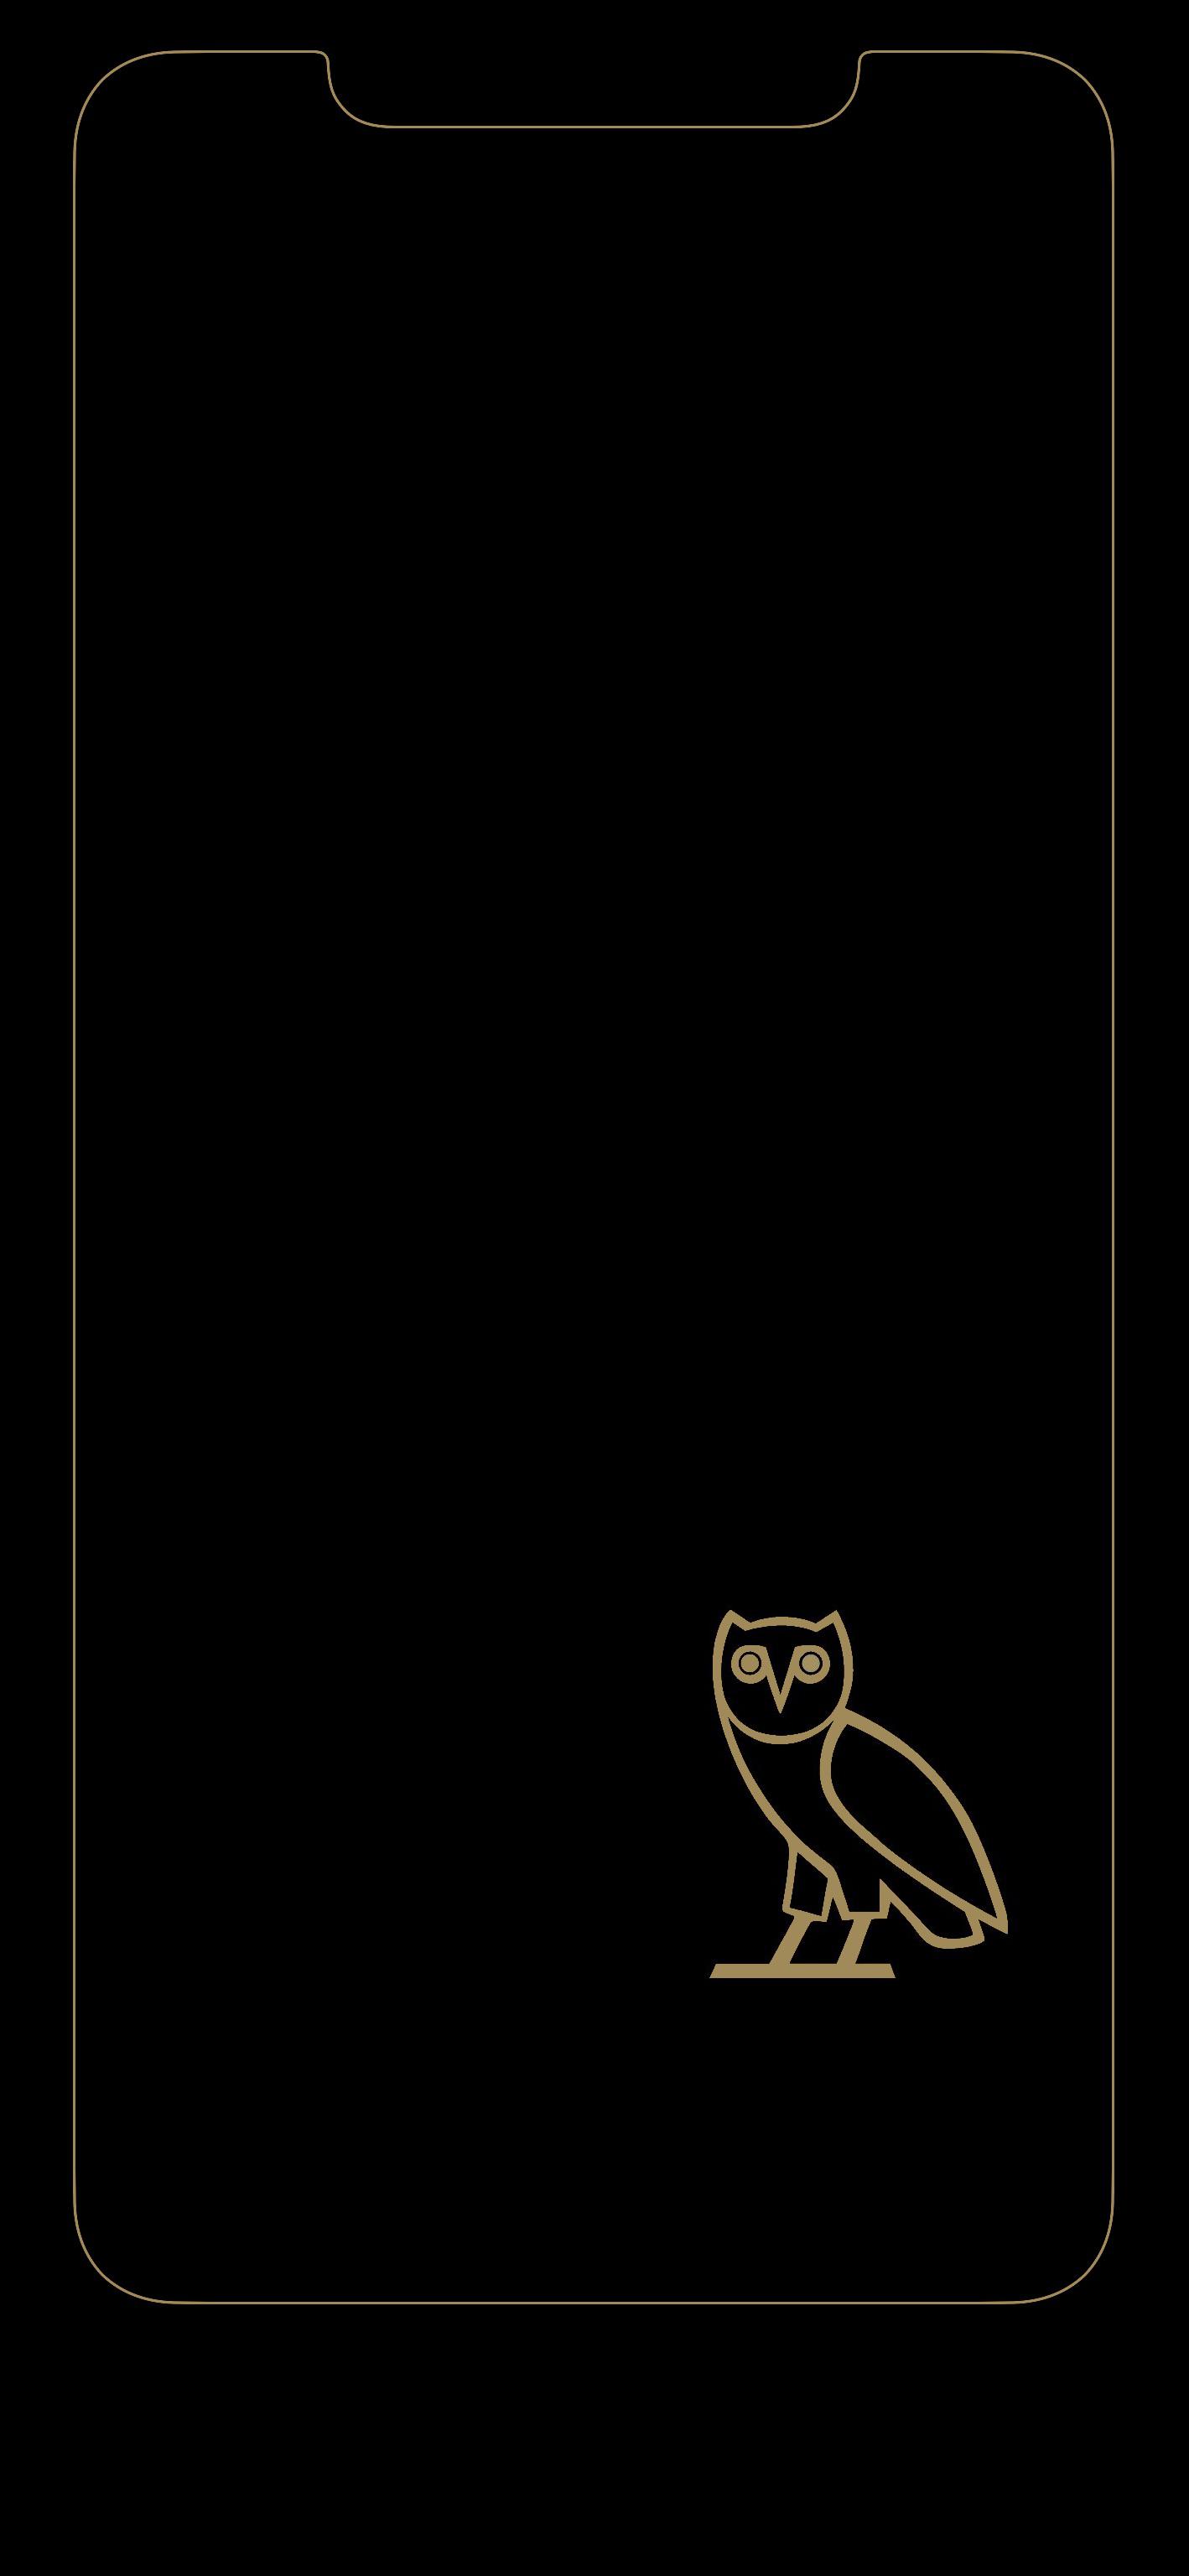 Drake Ovo Wallpapers Wallpaper Cave You can also upload and share your favorite owl wallpapers. drake ovo wallpapers wallpaper cave